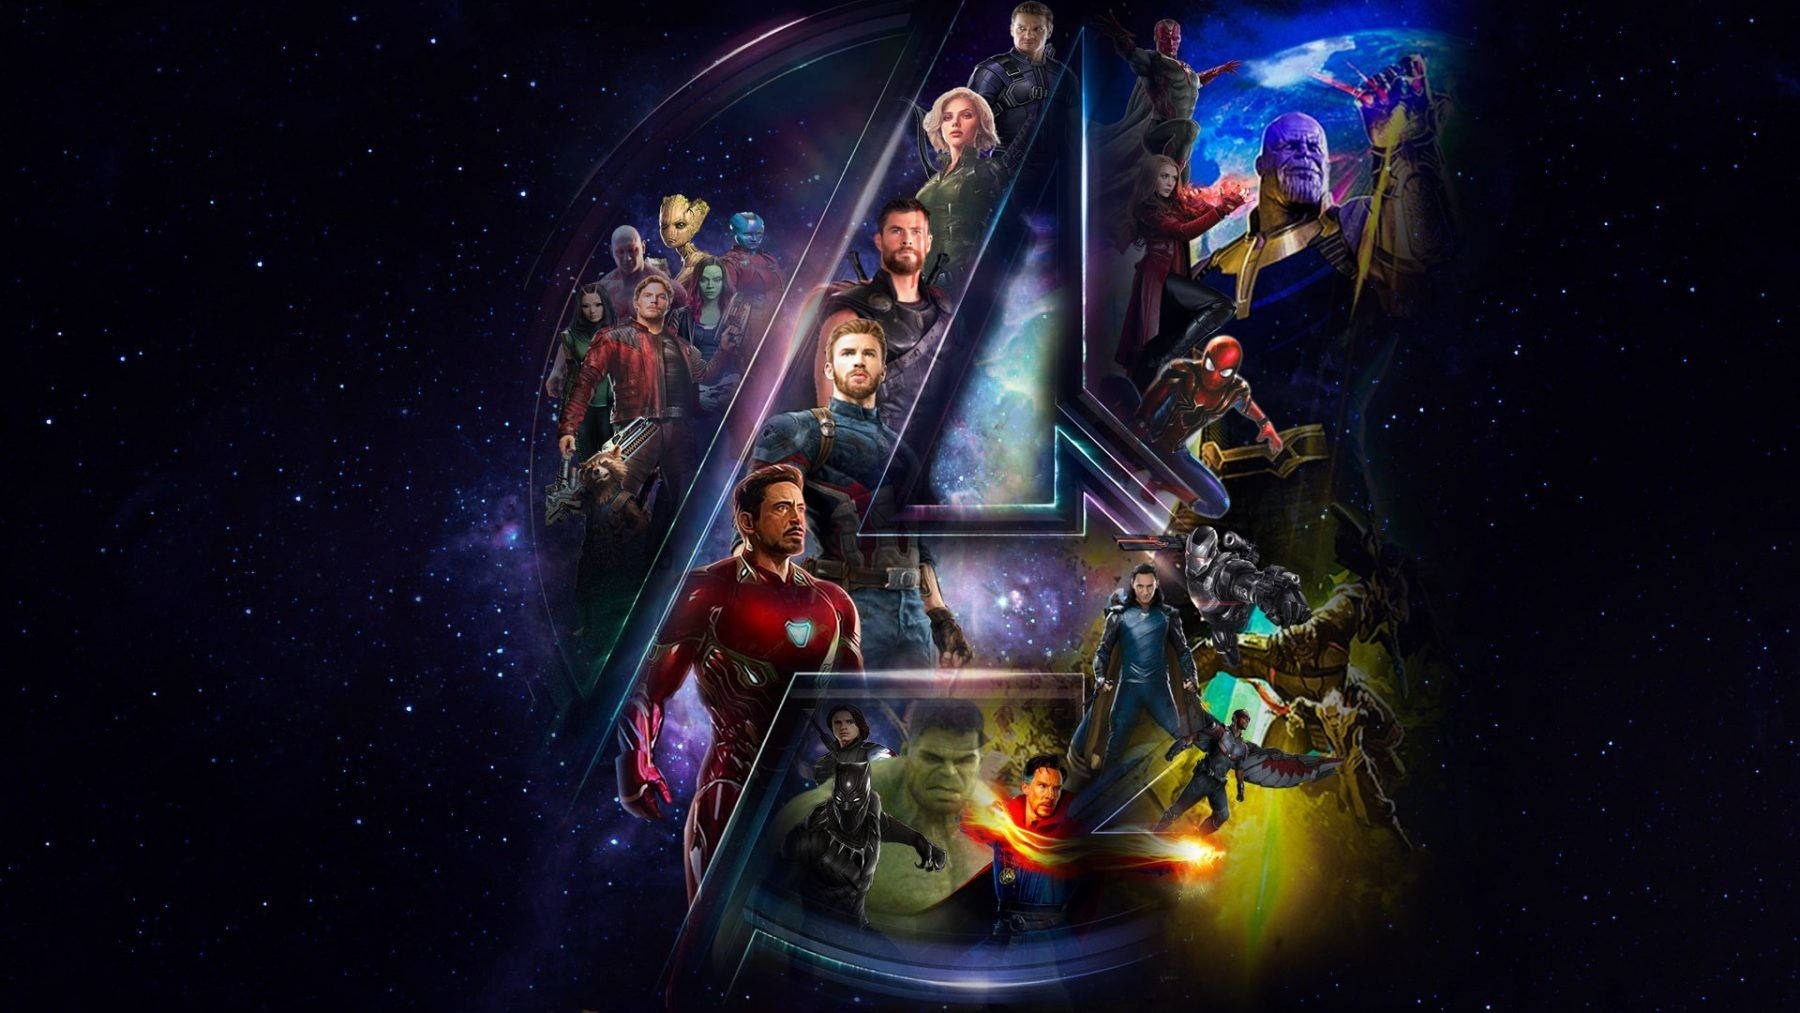 The Avengers Come Together to Defeat Thanos in Avengers: Infinity War Wallpaper